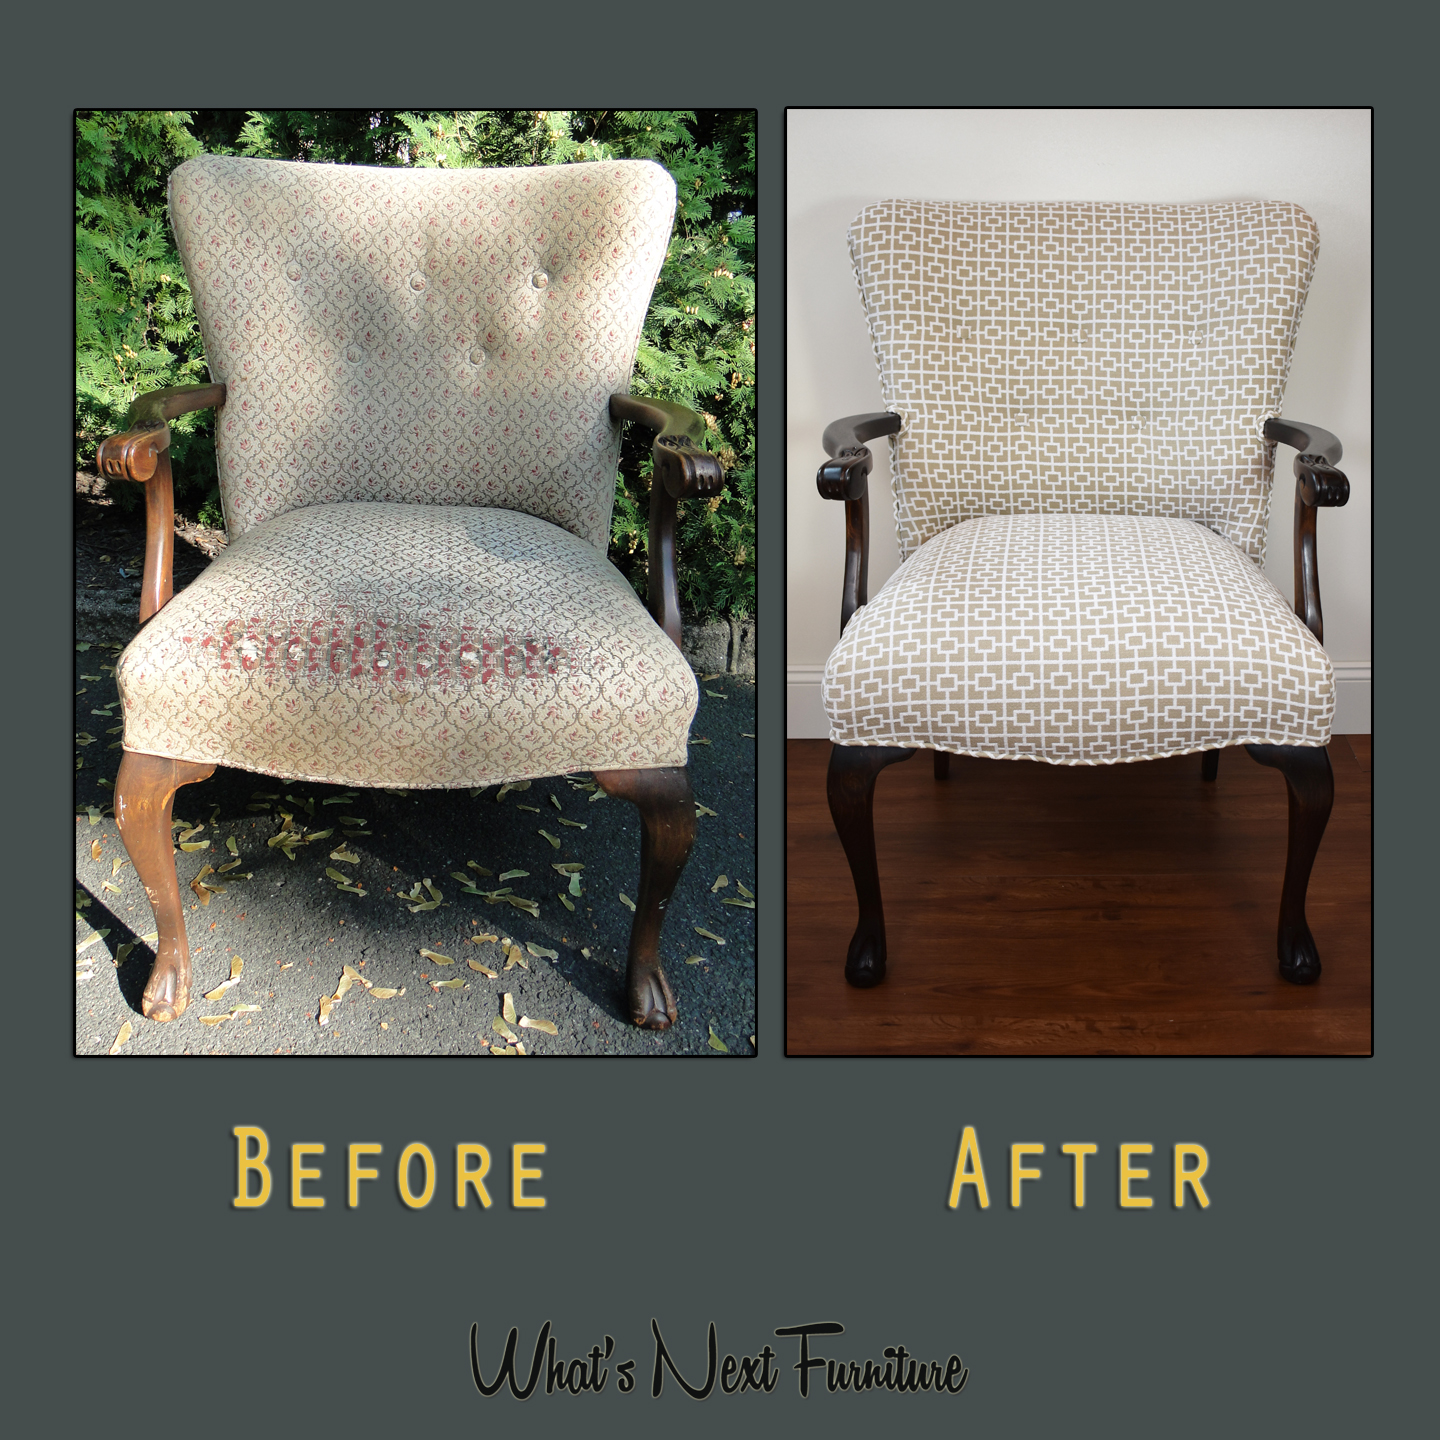 Diana larger arm chair before after square grey.jpg